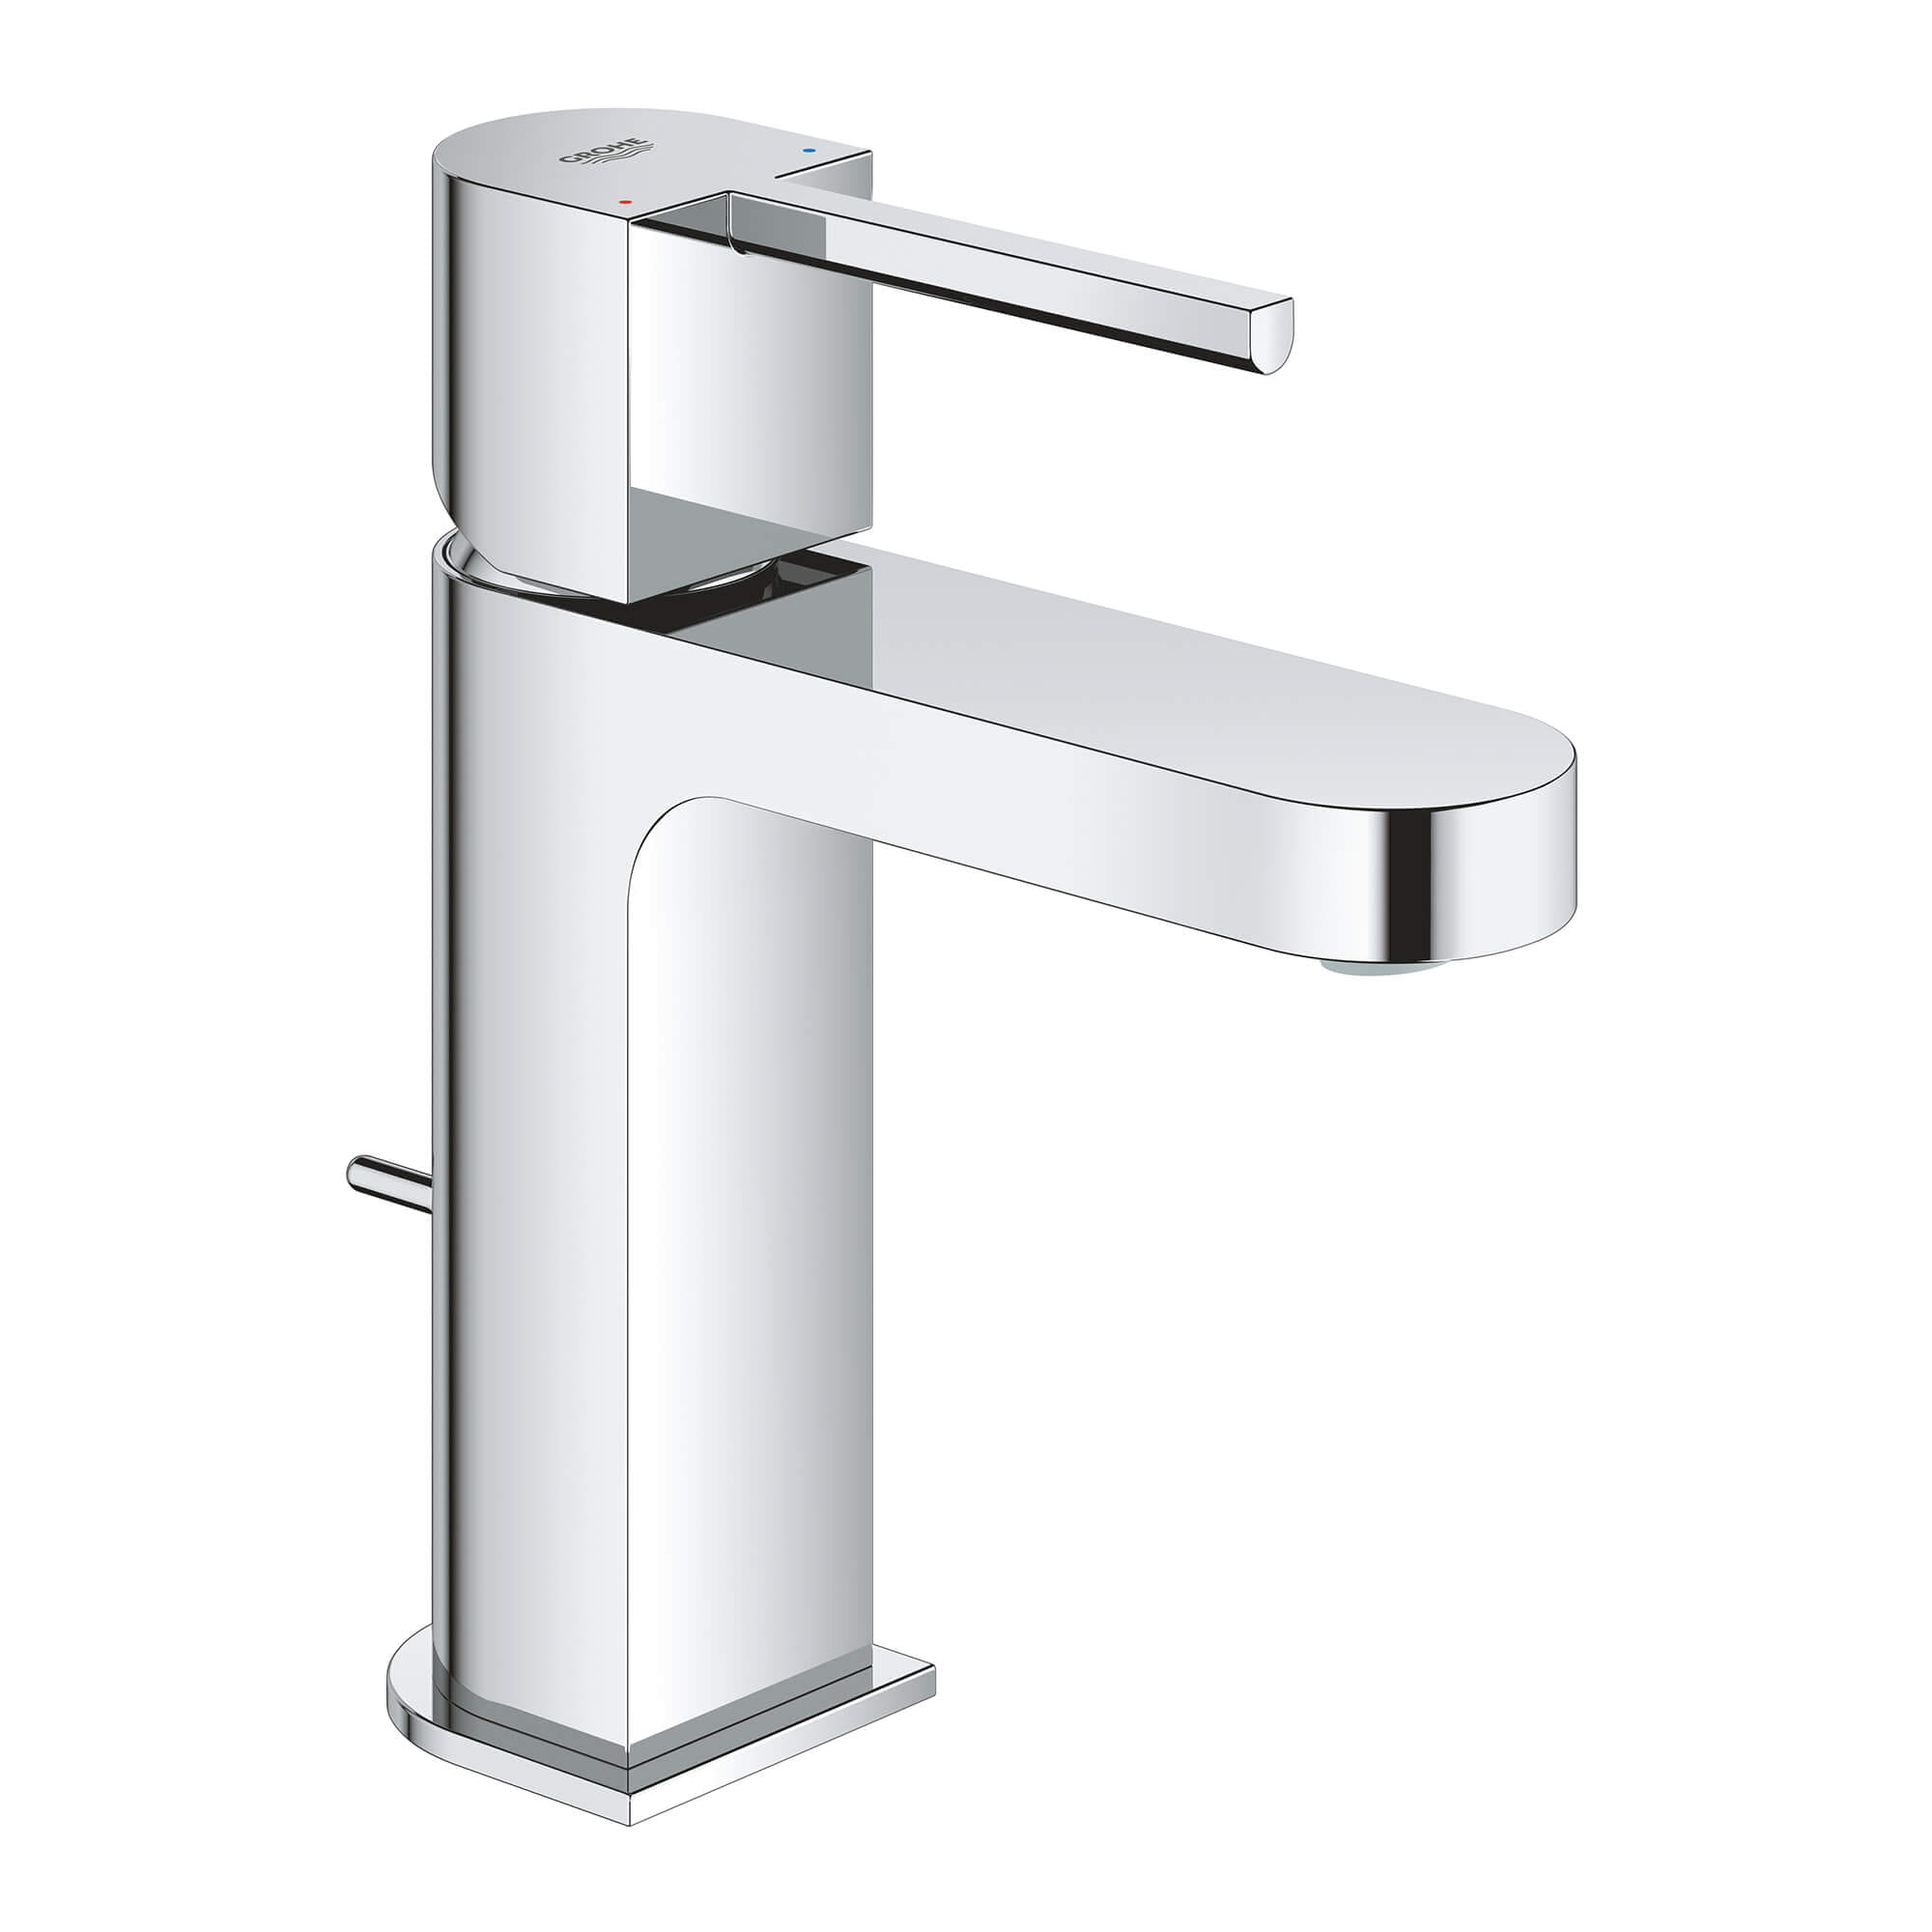 SINGLE HOLE SINGLE-HANDLE S-SIZE BATHROOM FAUCET 1.2 GPM-related